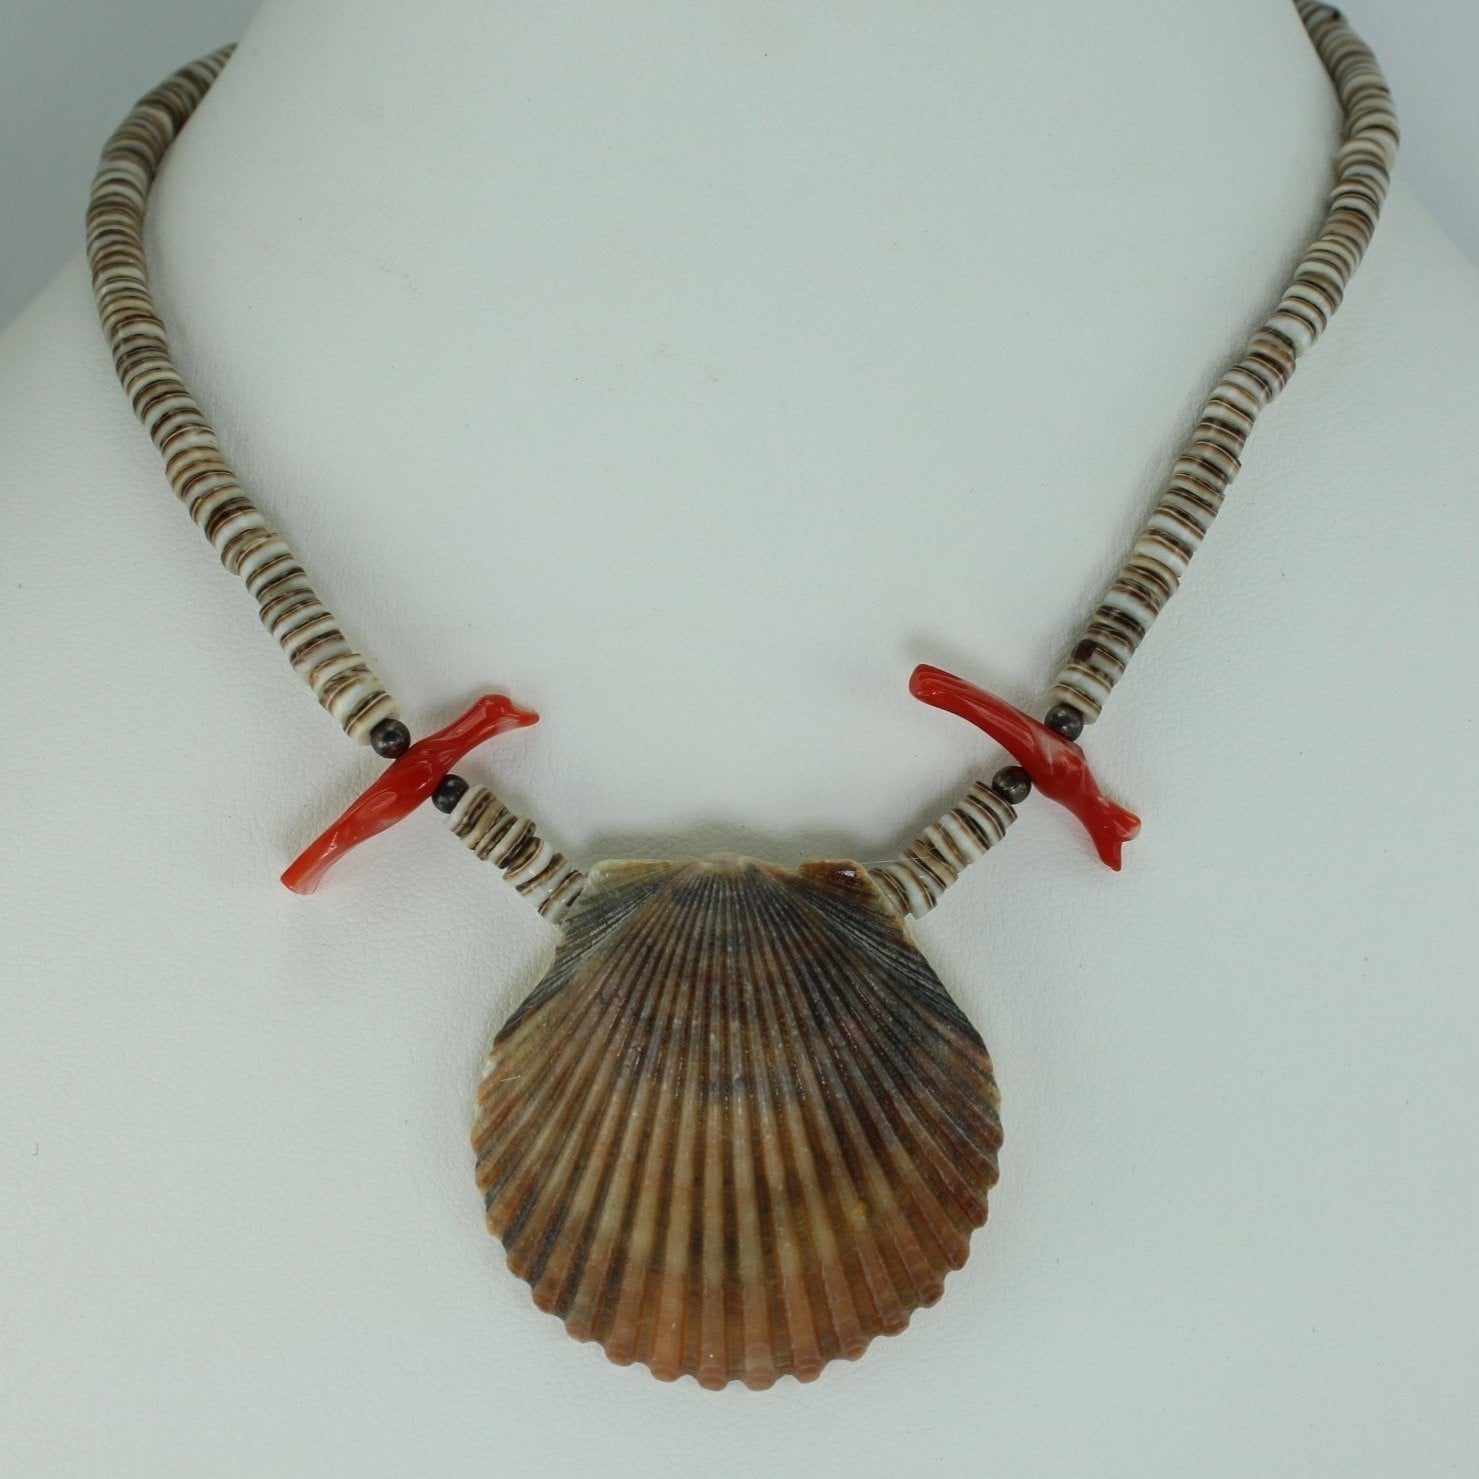 Scallop Shell Necklace Brown Heishi Coral Birds Southwest 15 1/2" Organic Natural